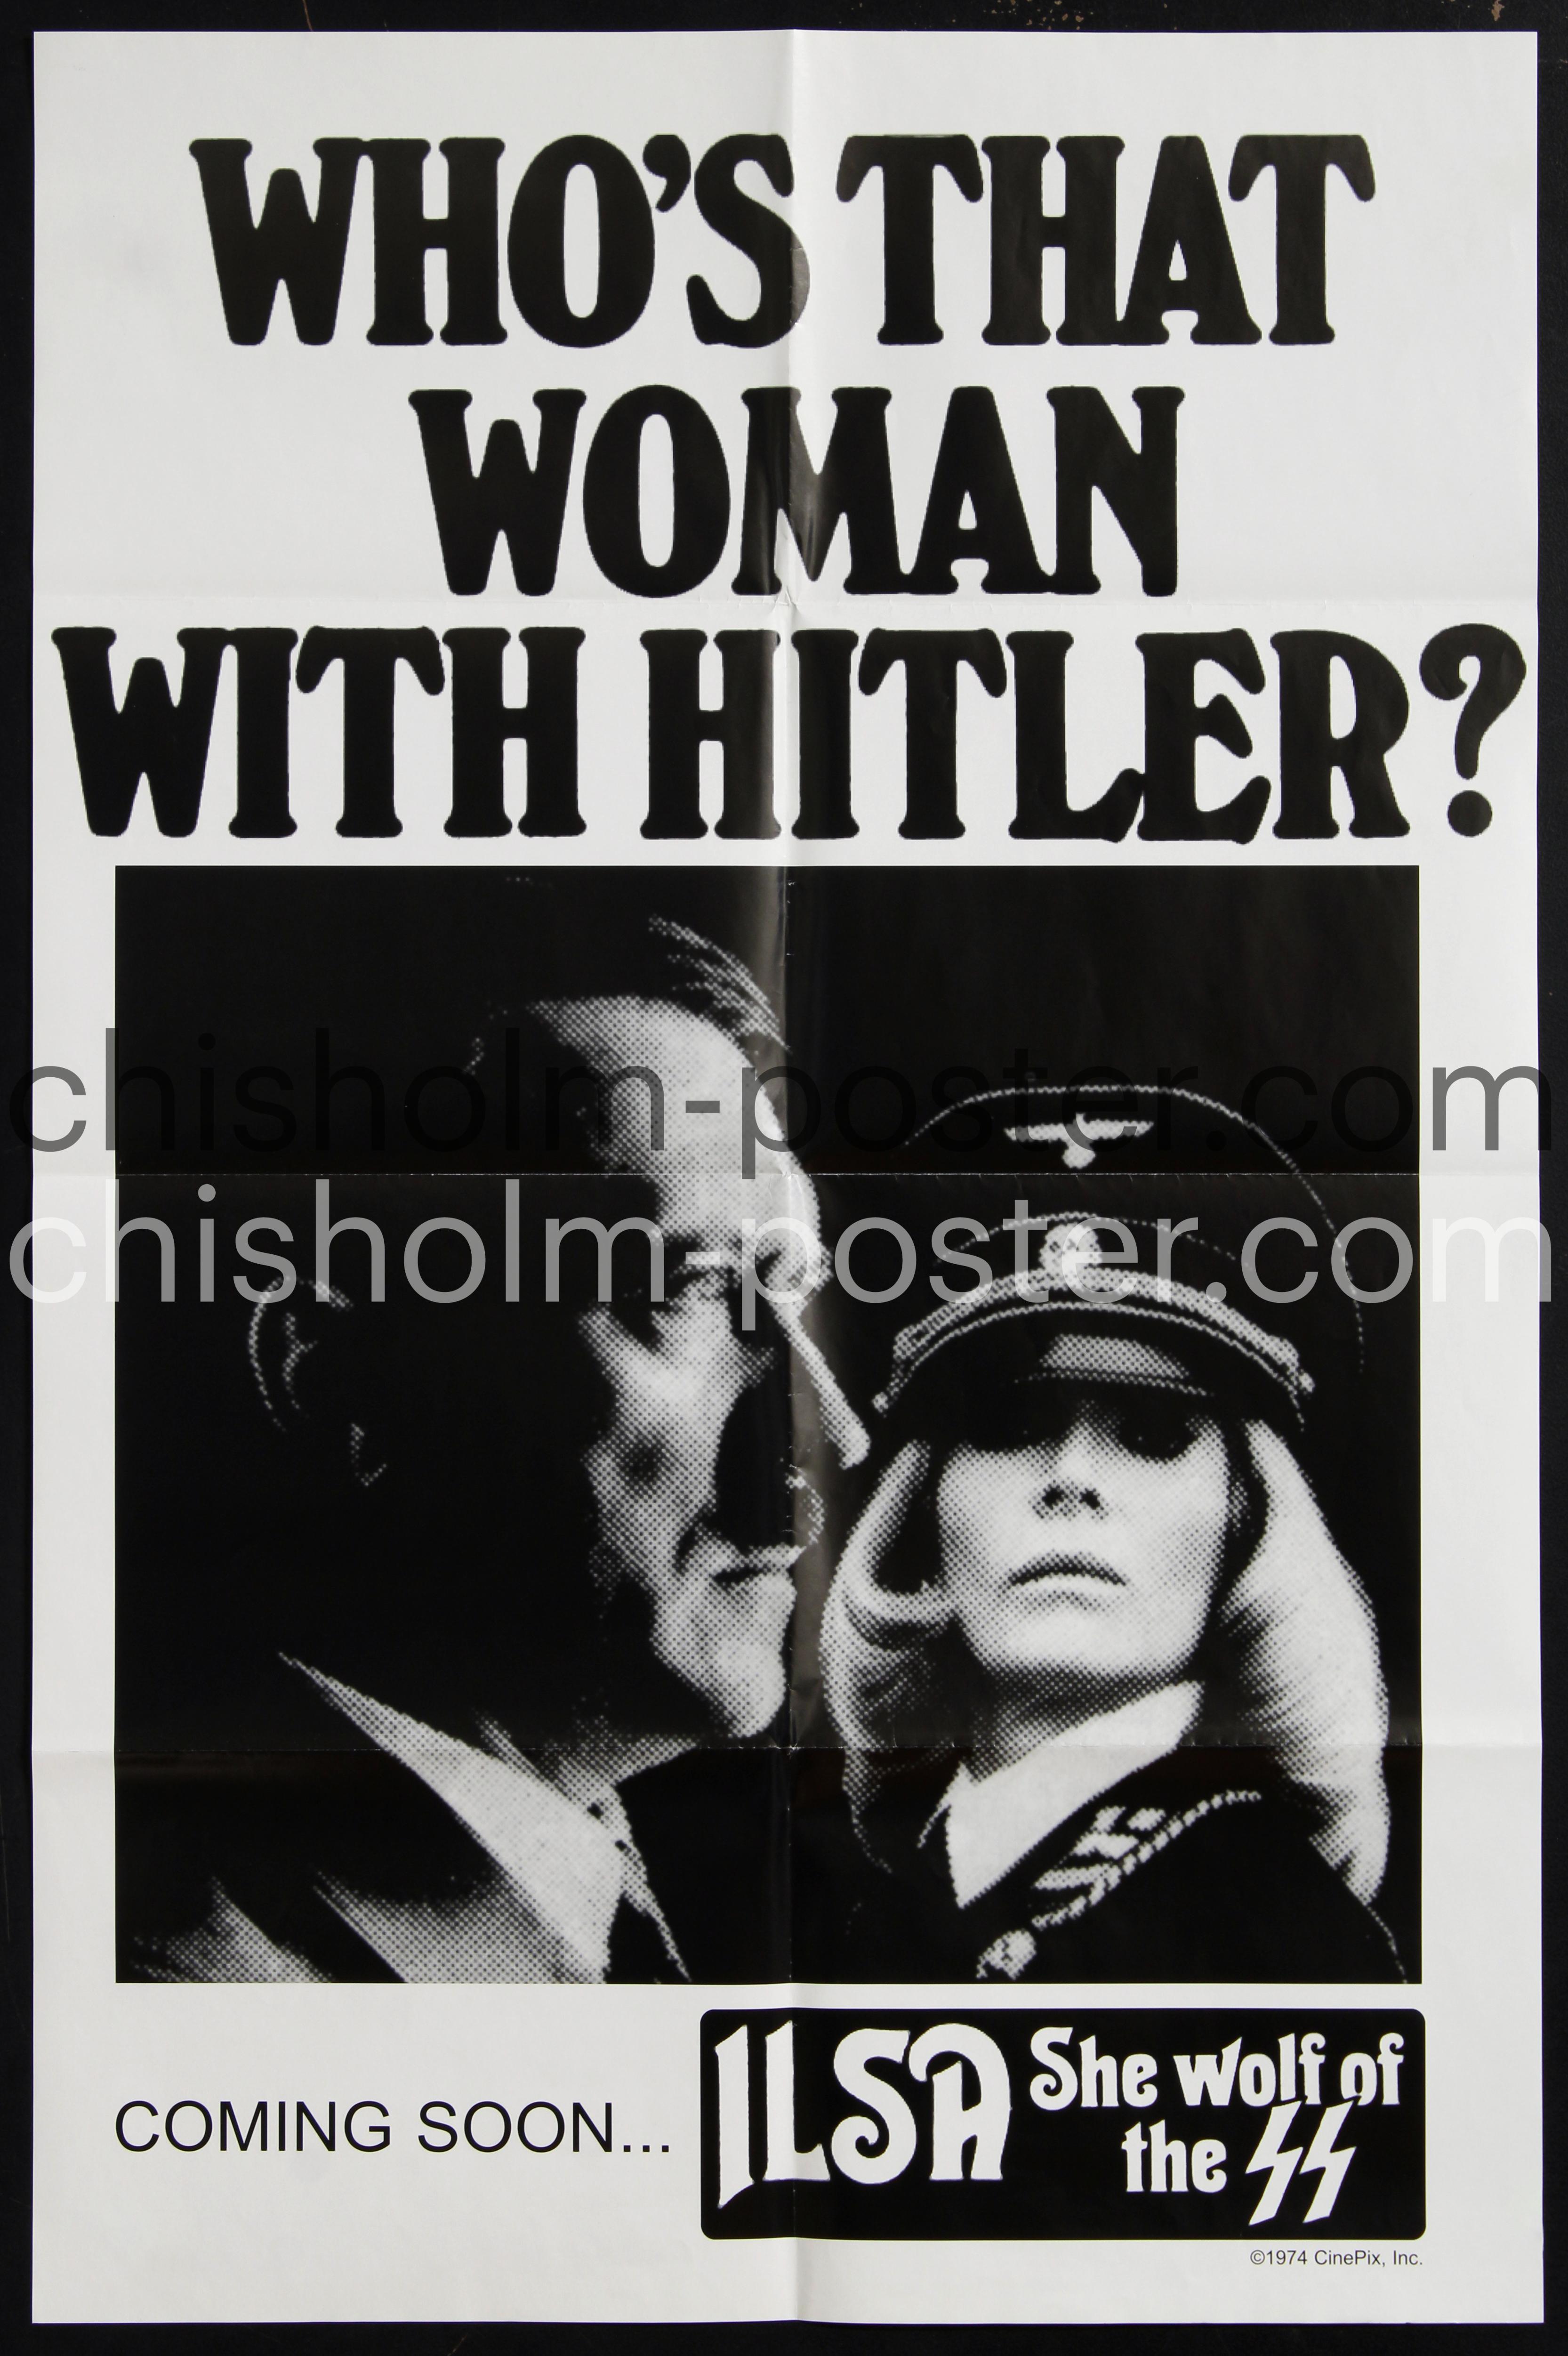 ILSA SHE WOLF of the SS - Who's That Woman With Hitler? Digital  reproduction | Original Vintage Poster | Chisholm Larsson Gallery